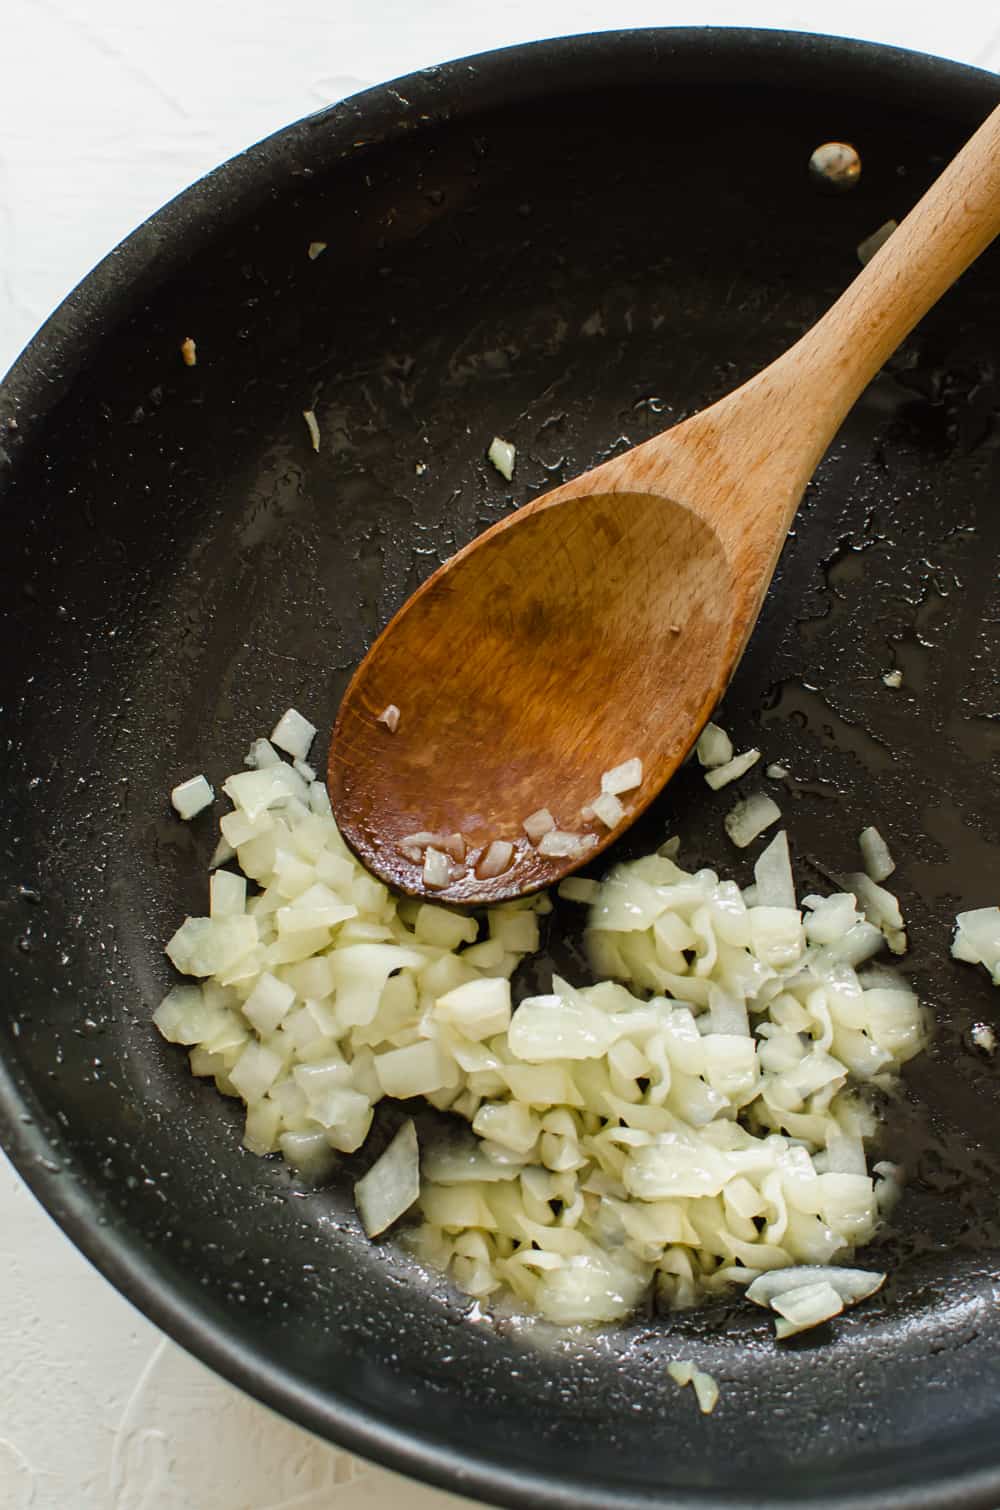 diced onions beting sauted in a pan